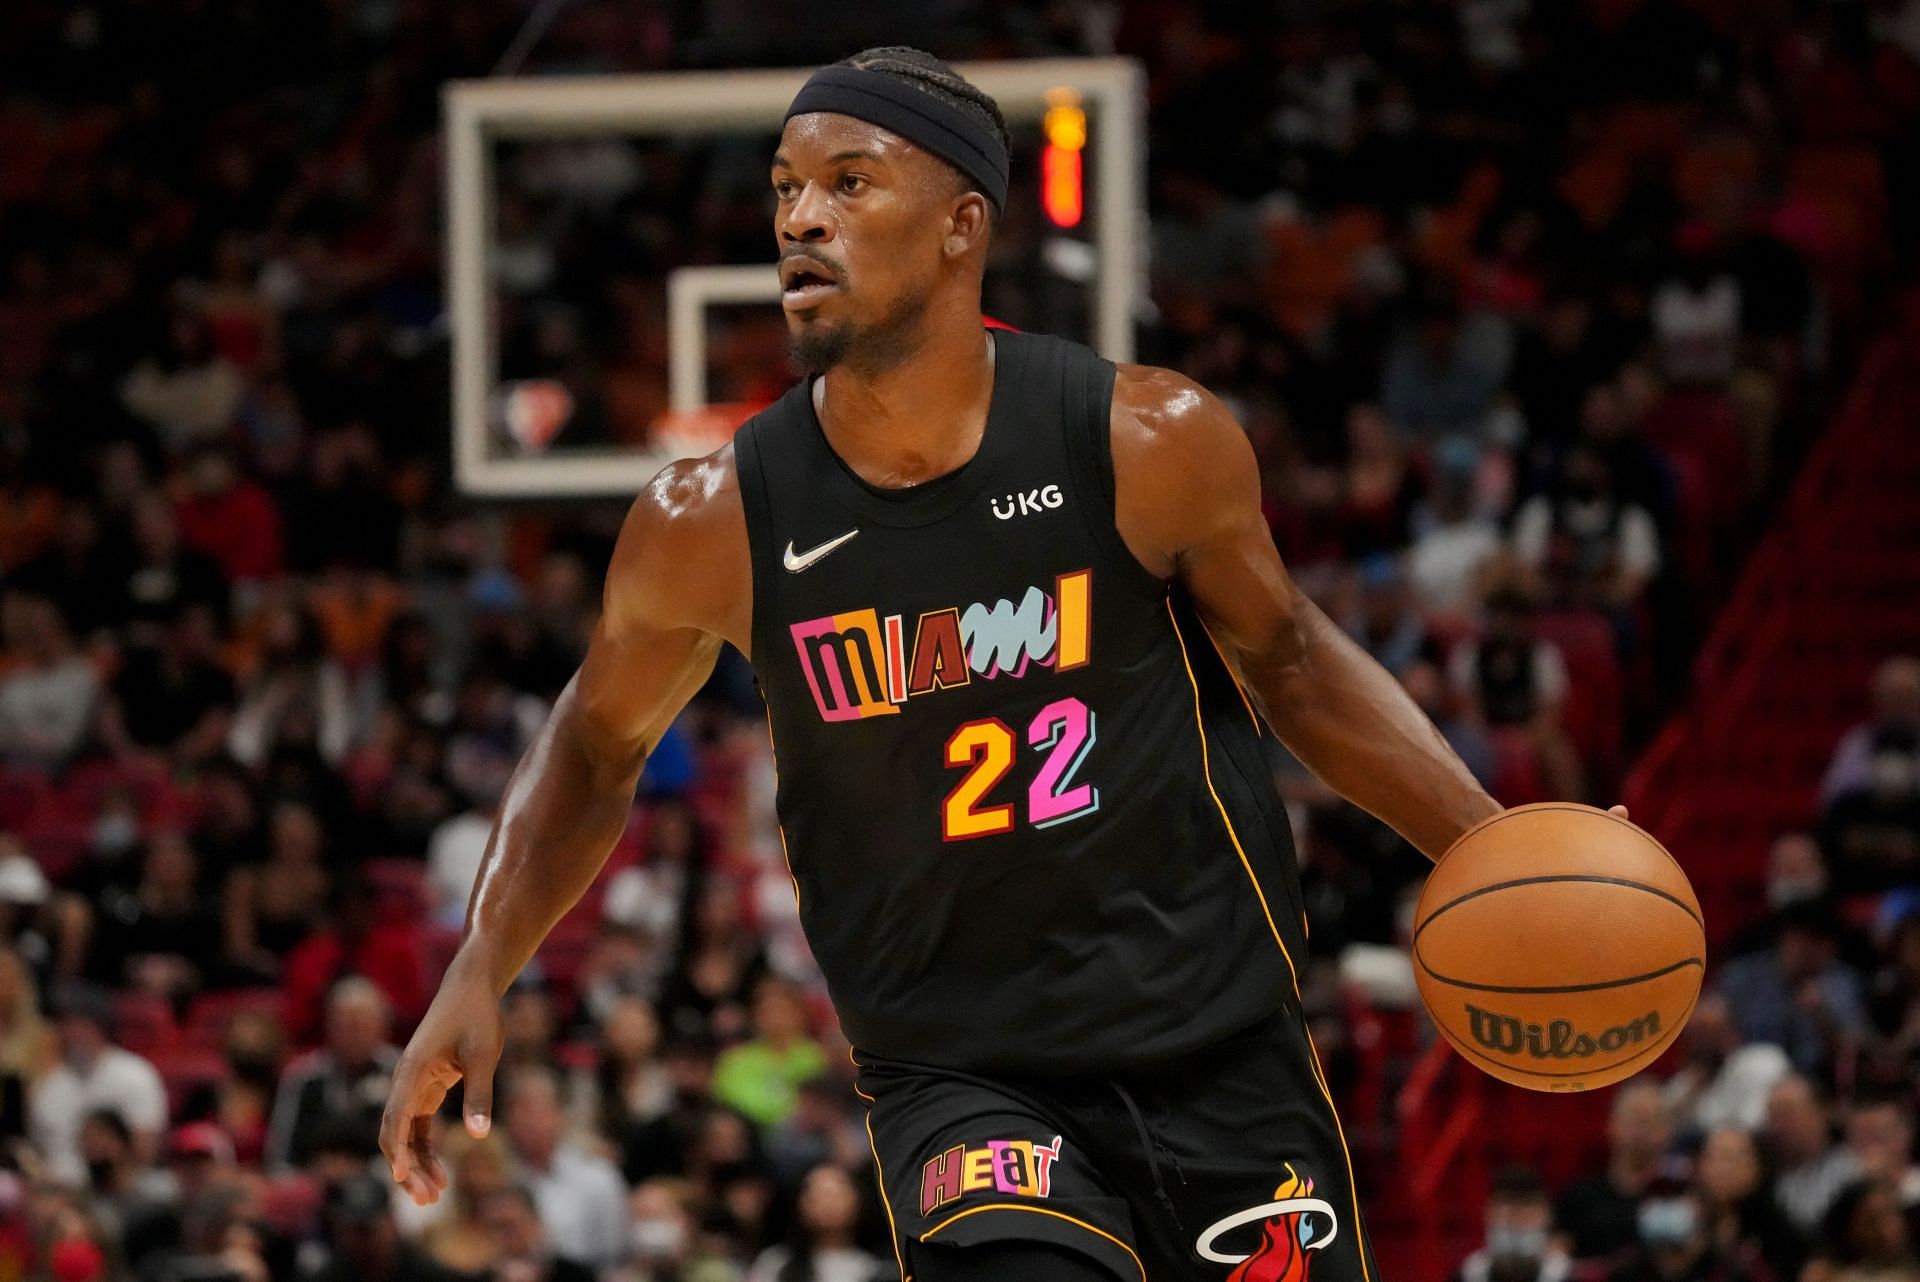 Miami Heat wing Jimmy Butler is listed as questionable